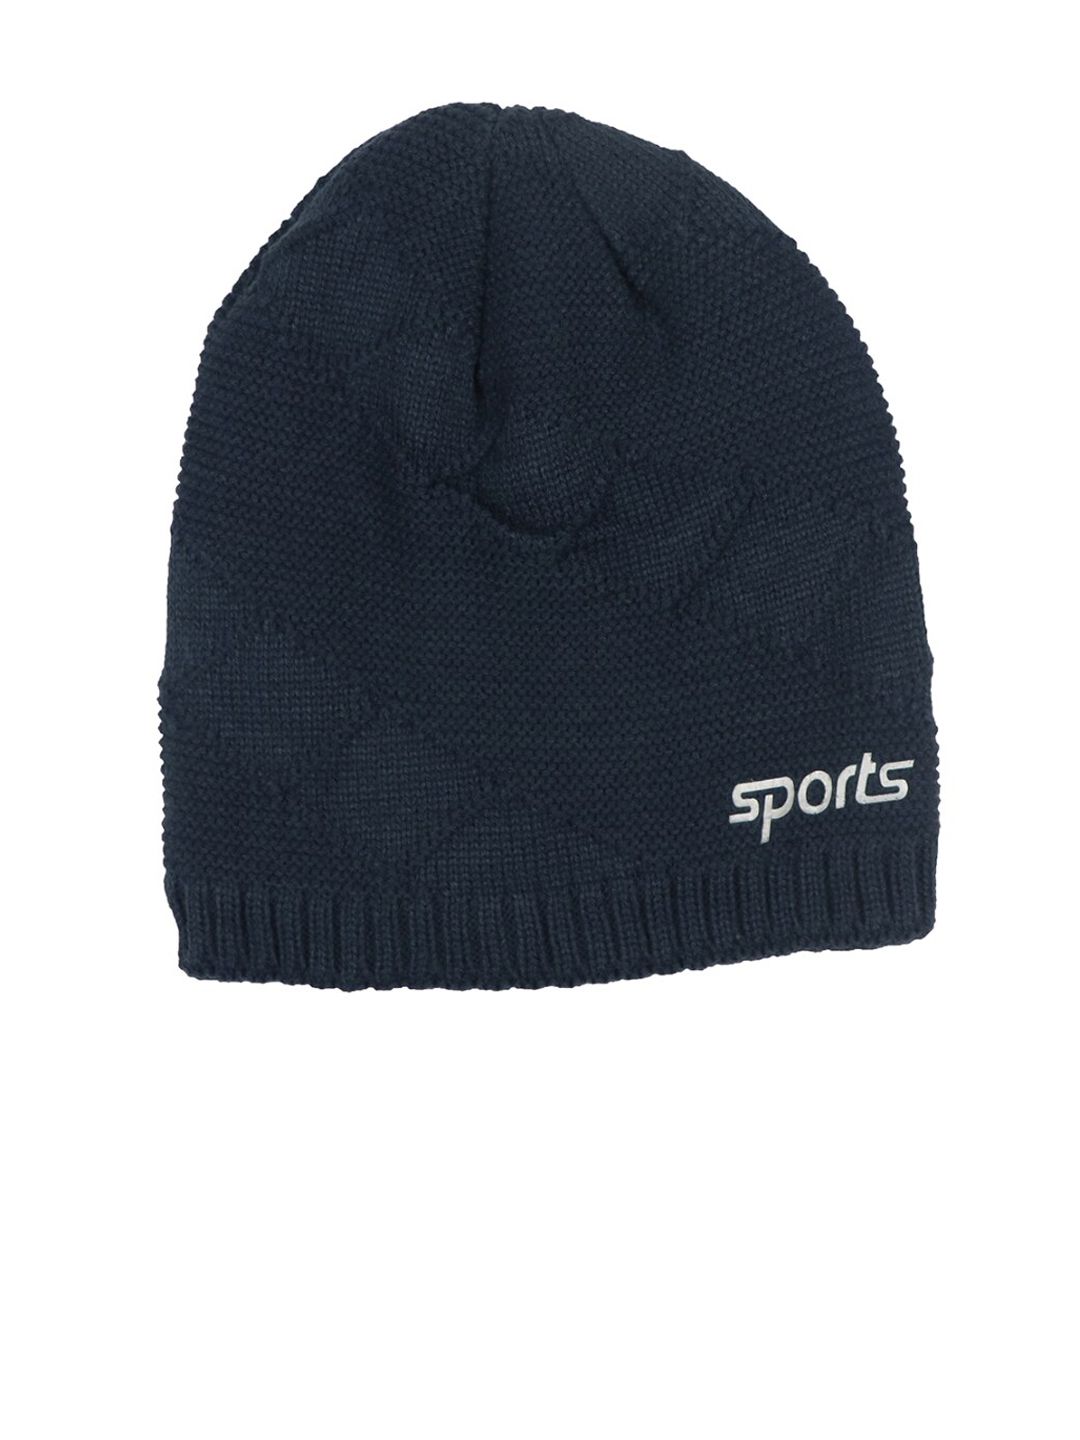 iSWEVEN Unisex Blue Self-Design Woven Expandable Beanie Price in India